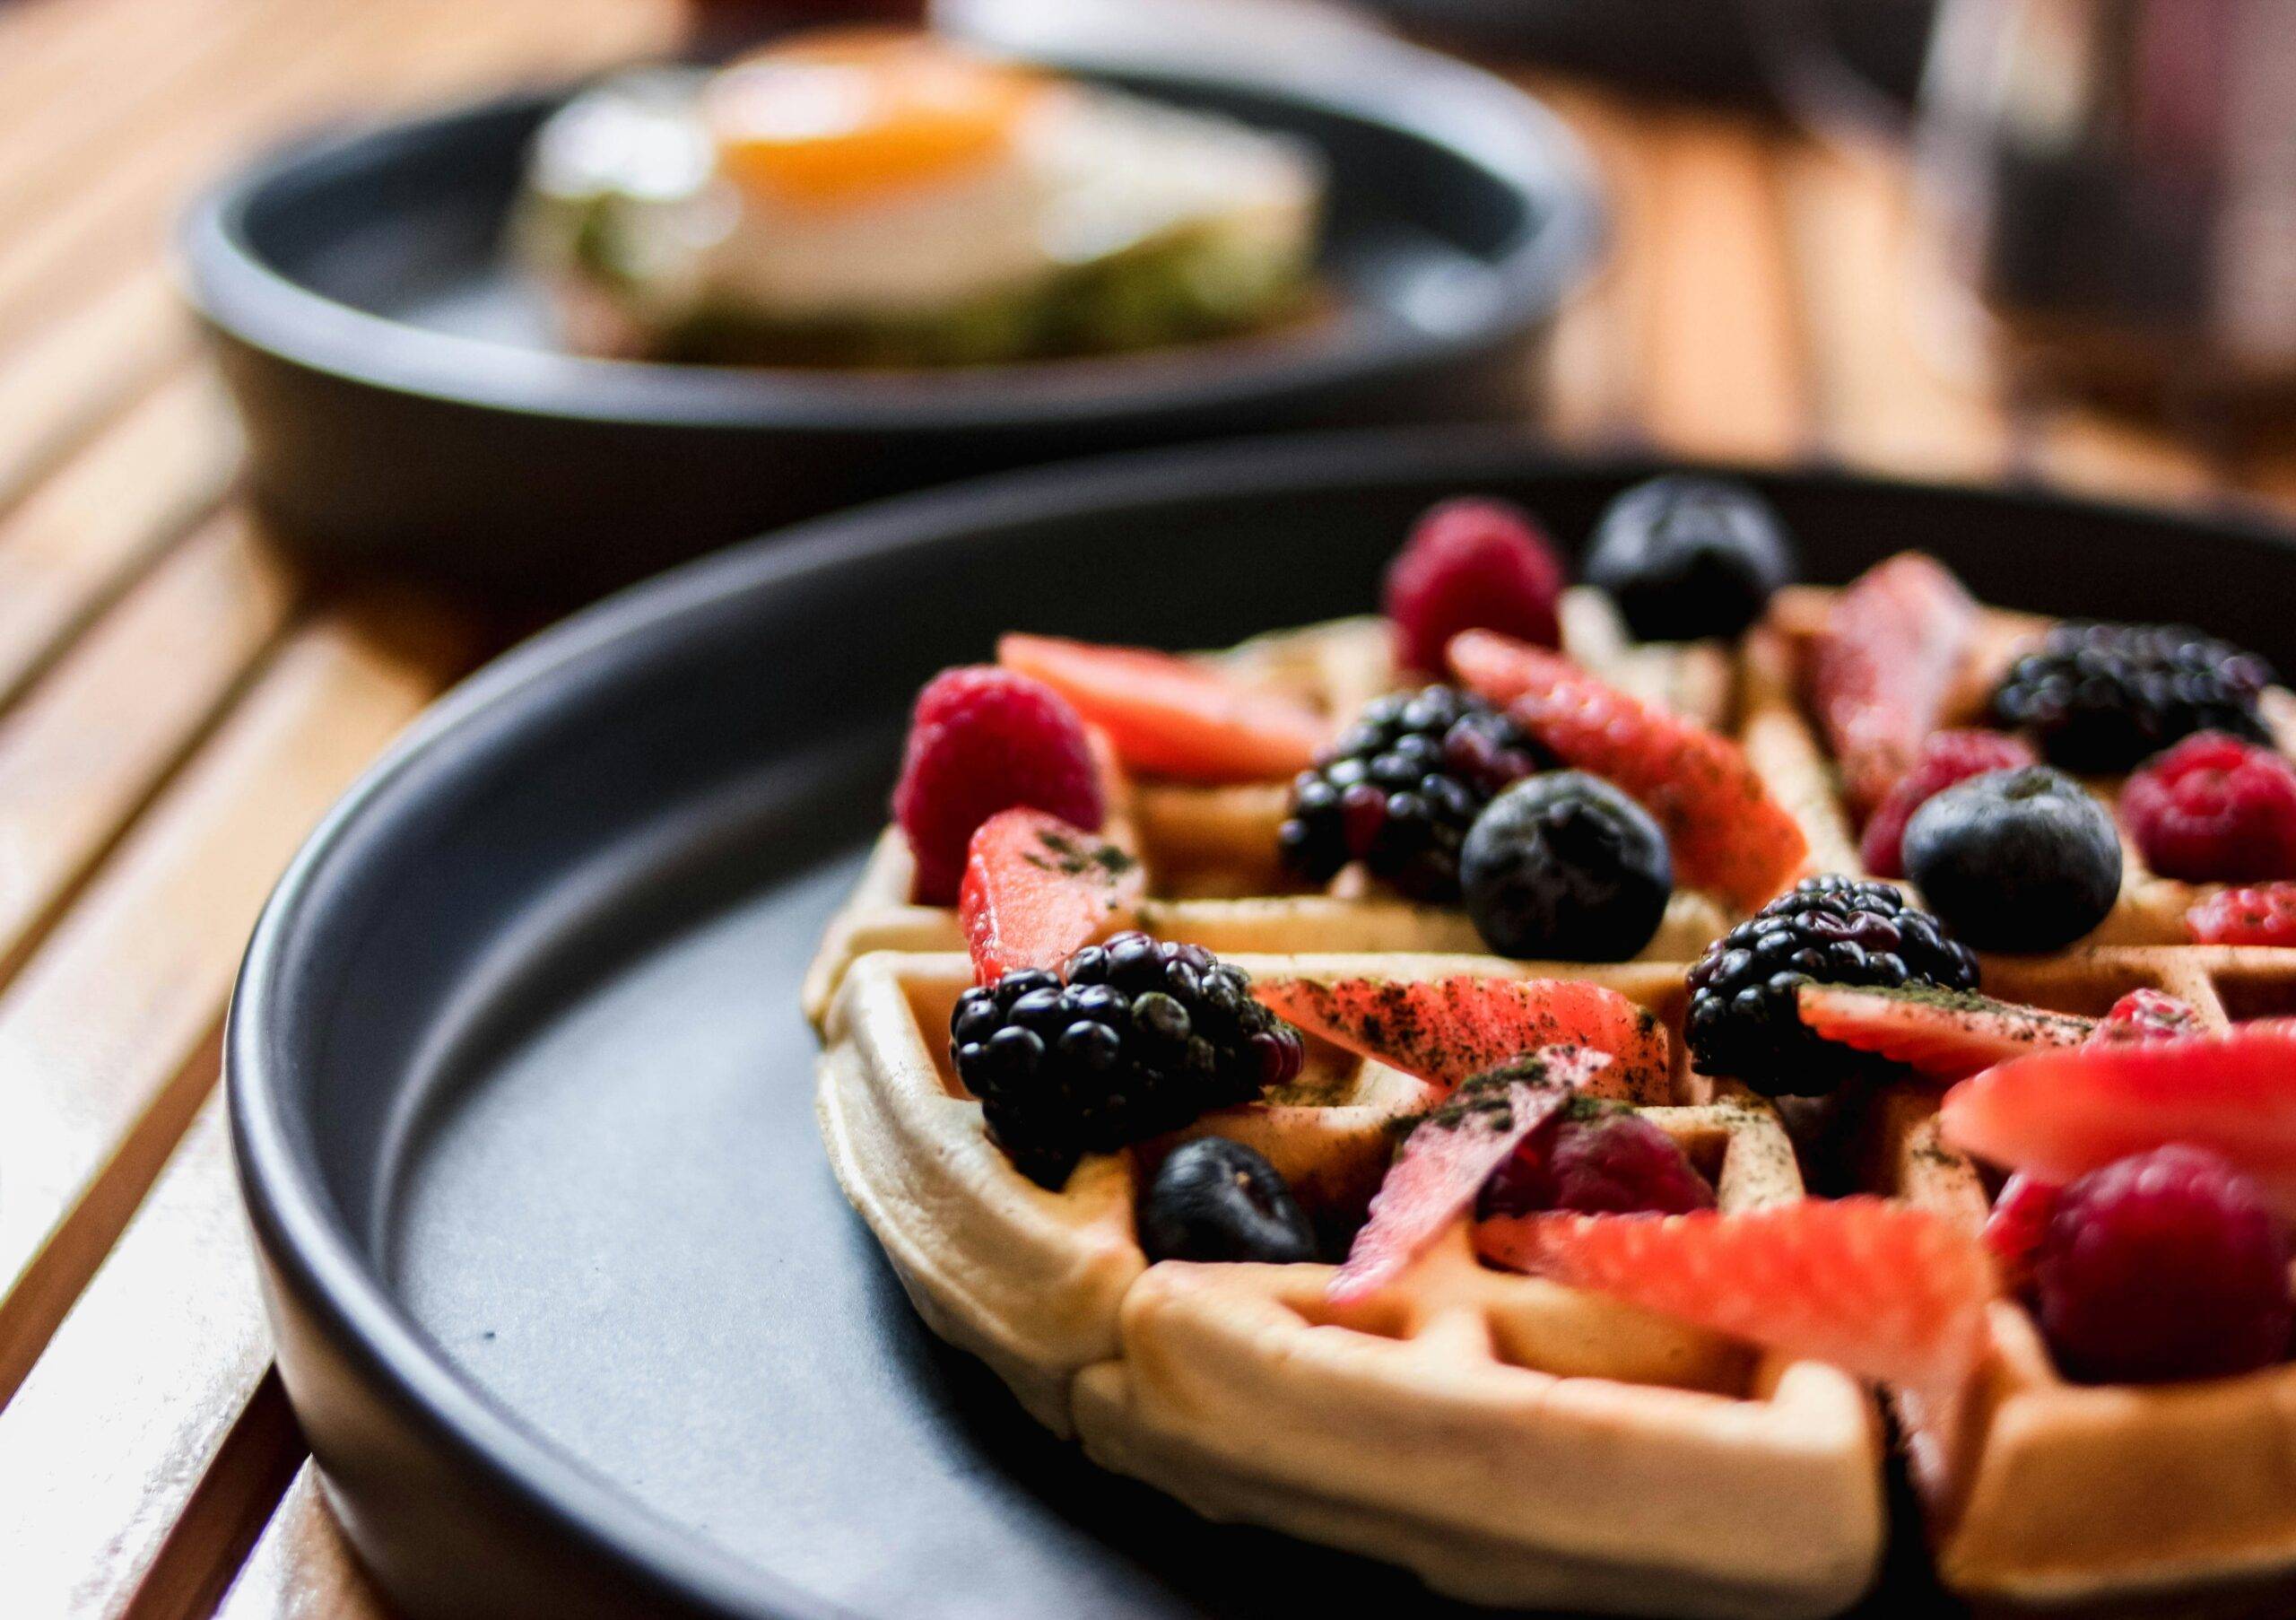 Indulge in the Irresistible: History of Belgian Waffles with Berries